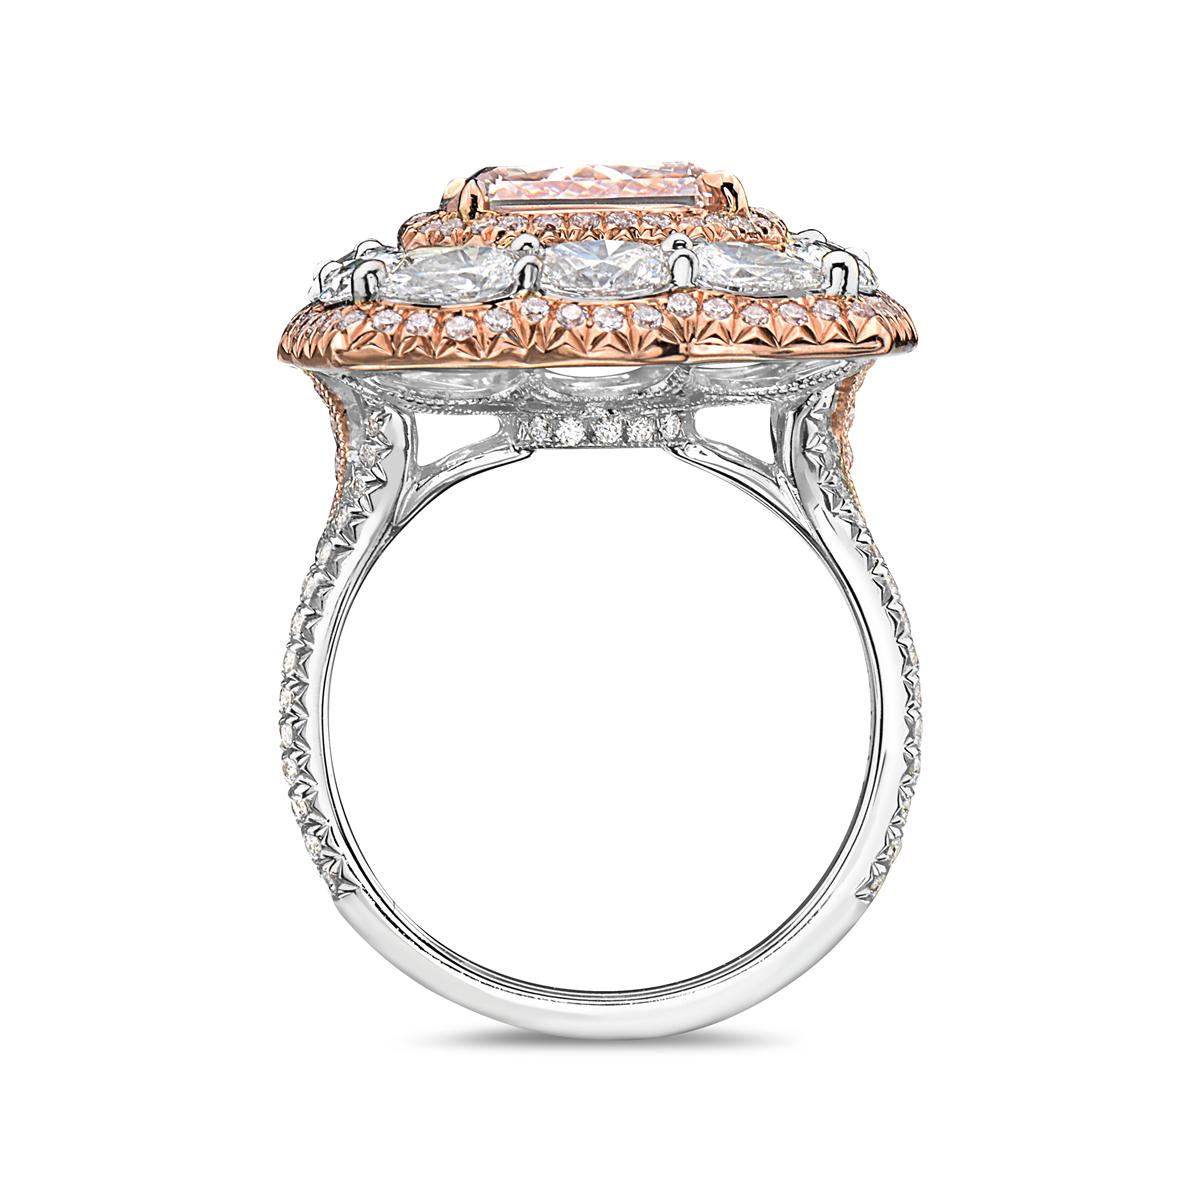 This 4.04 carat VS1 square radiant cut fancy brown pink diamond engagement ring features 0.37 carats of round diamonds and 1.97 carats of pear and marquise shape diamonds set in 18K white and rose gold. Total weight 9 grams. Size 6.

Can be resized